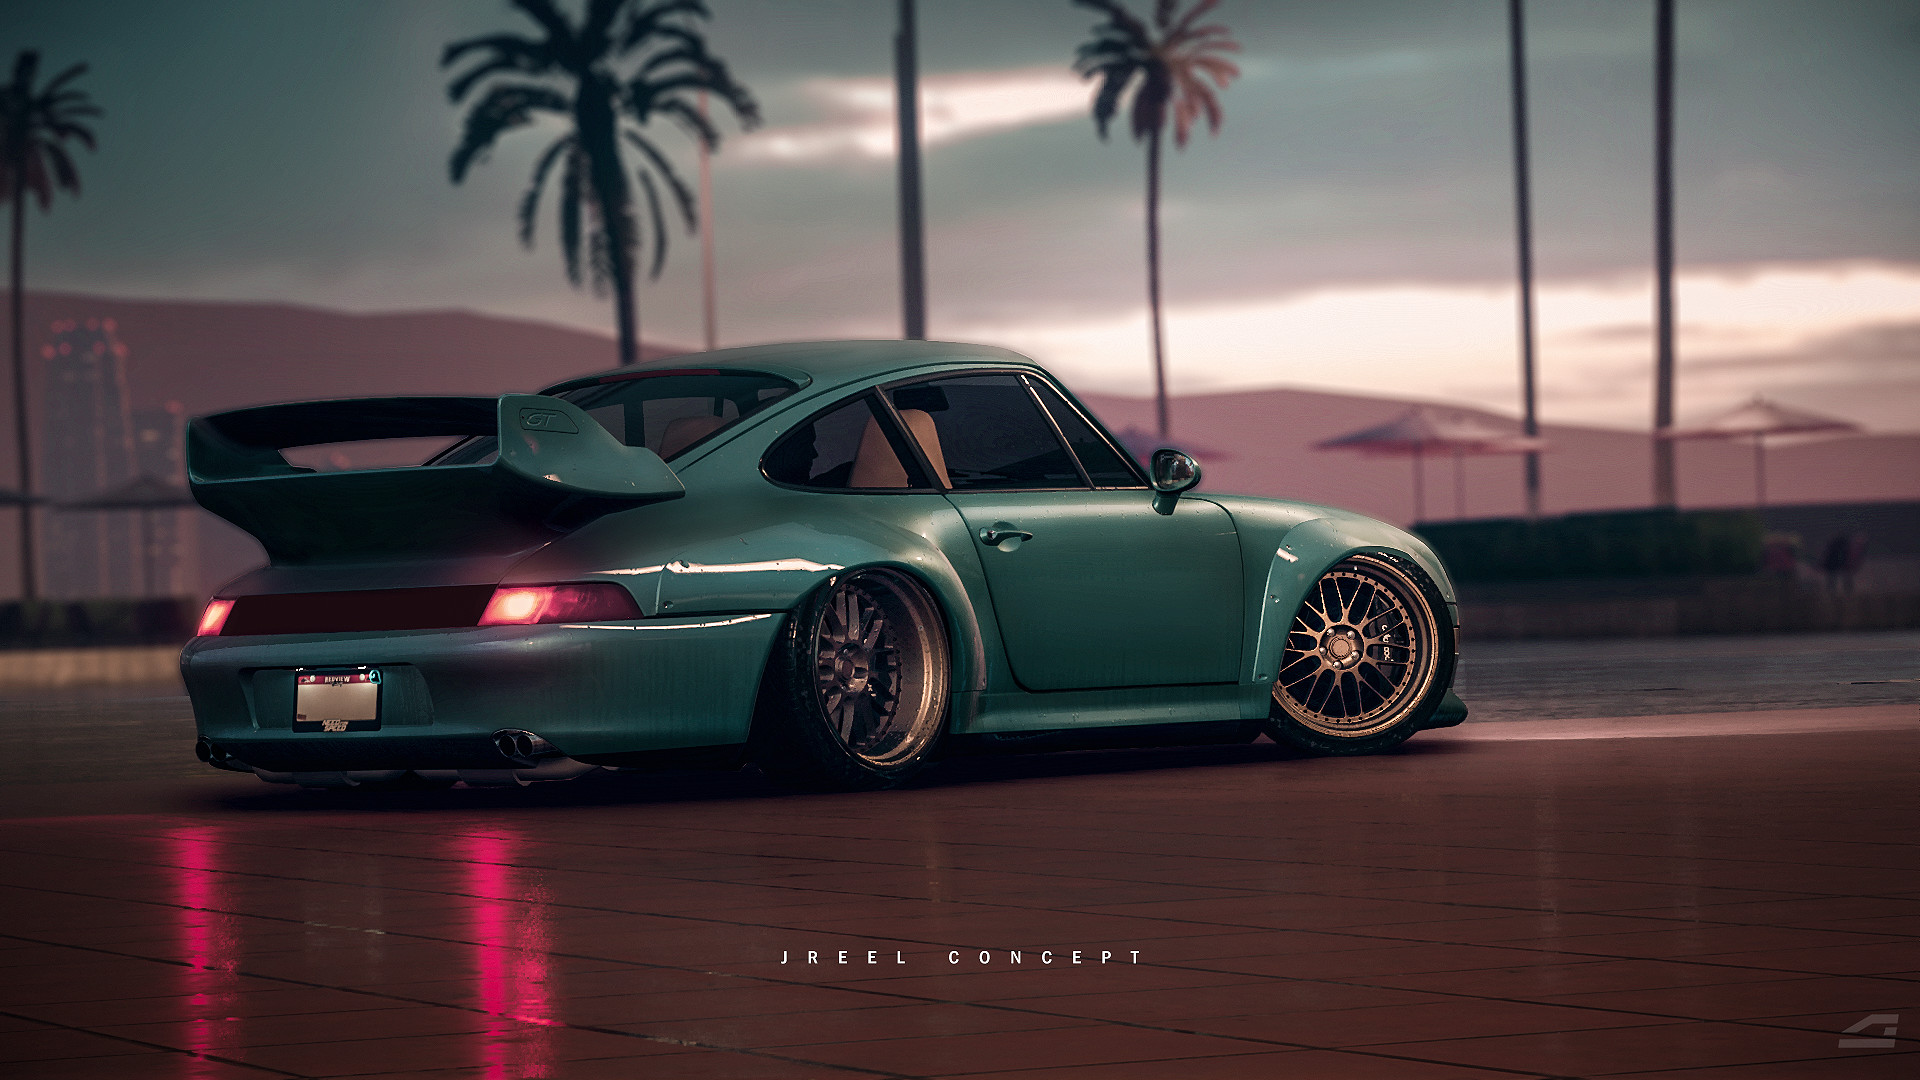 Need For Speed 2015 Hd Wallpaper Achtergrond 1920x1080